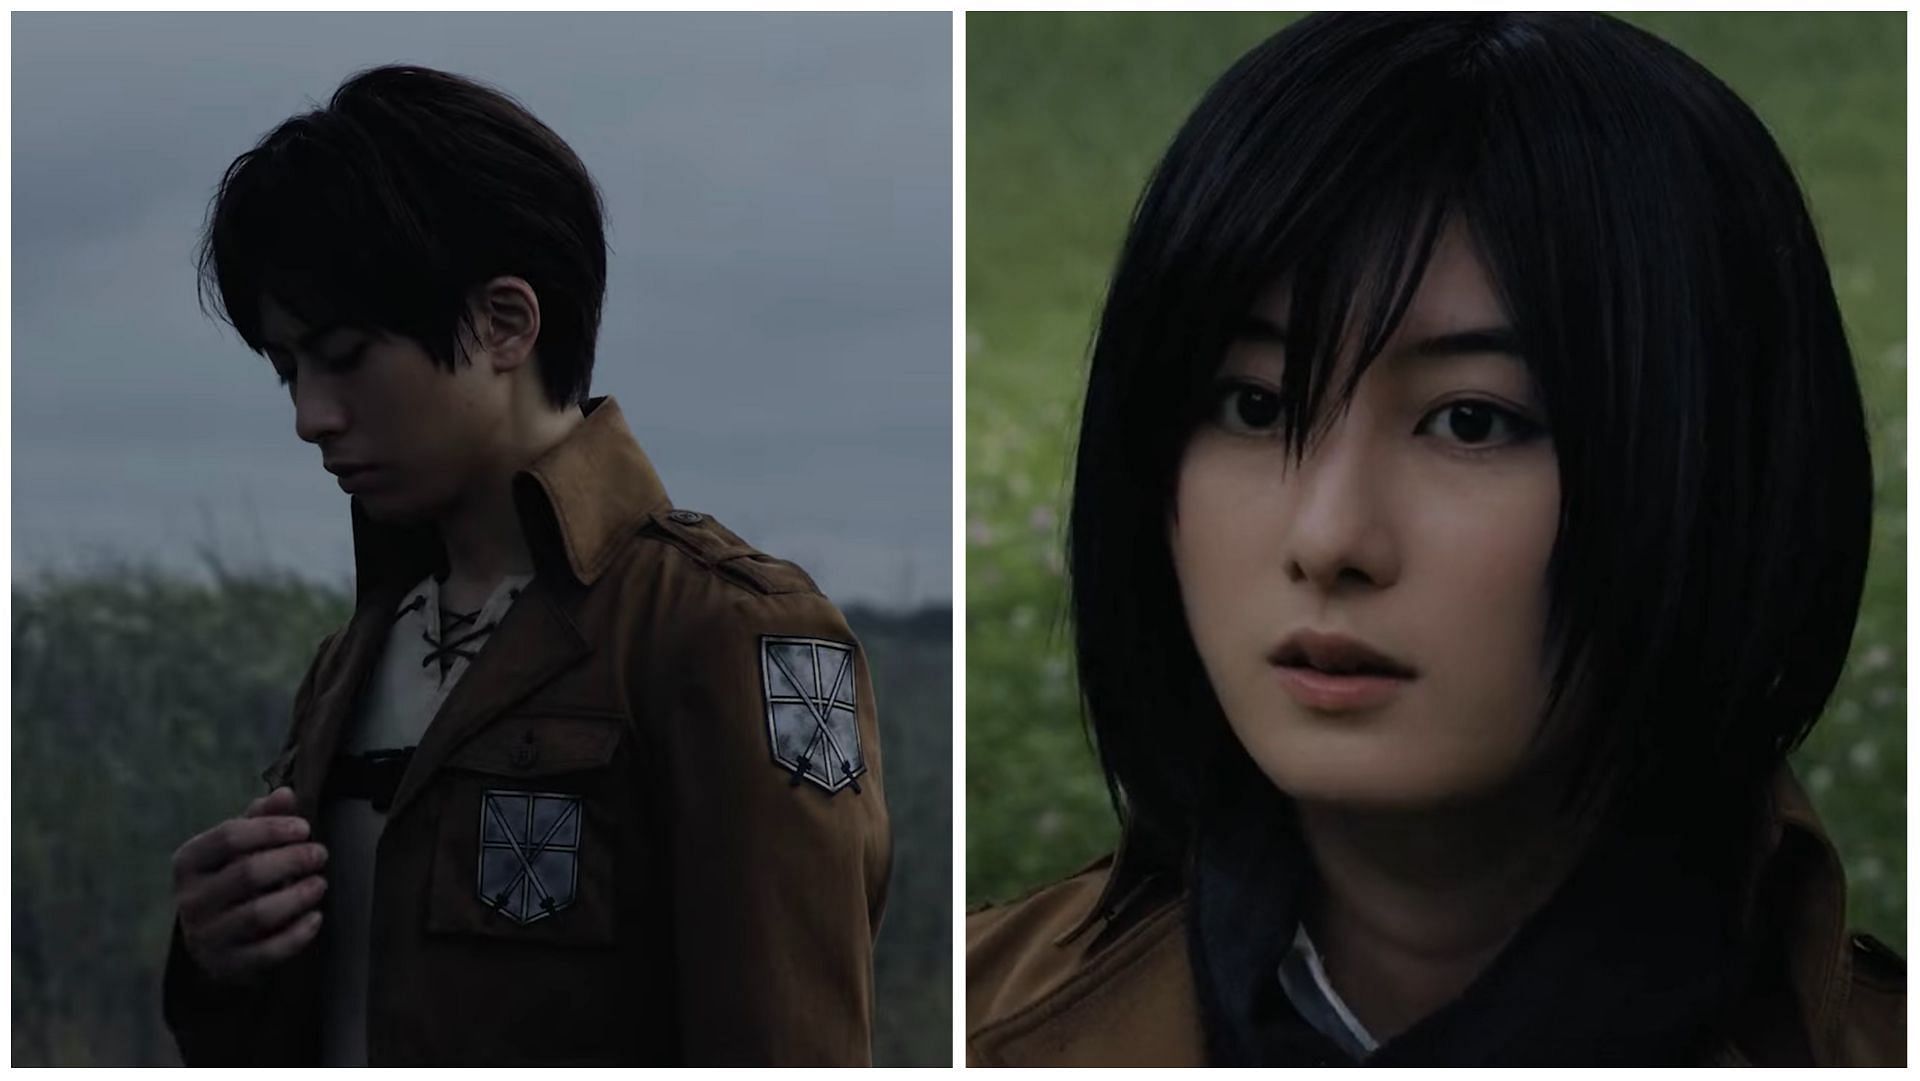 Fans react to Eren and Mikasa in the musical adaptation trailer (Image via Attack on Titan)